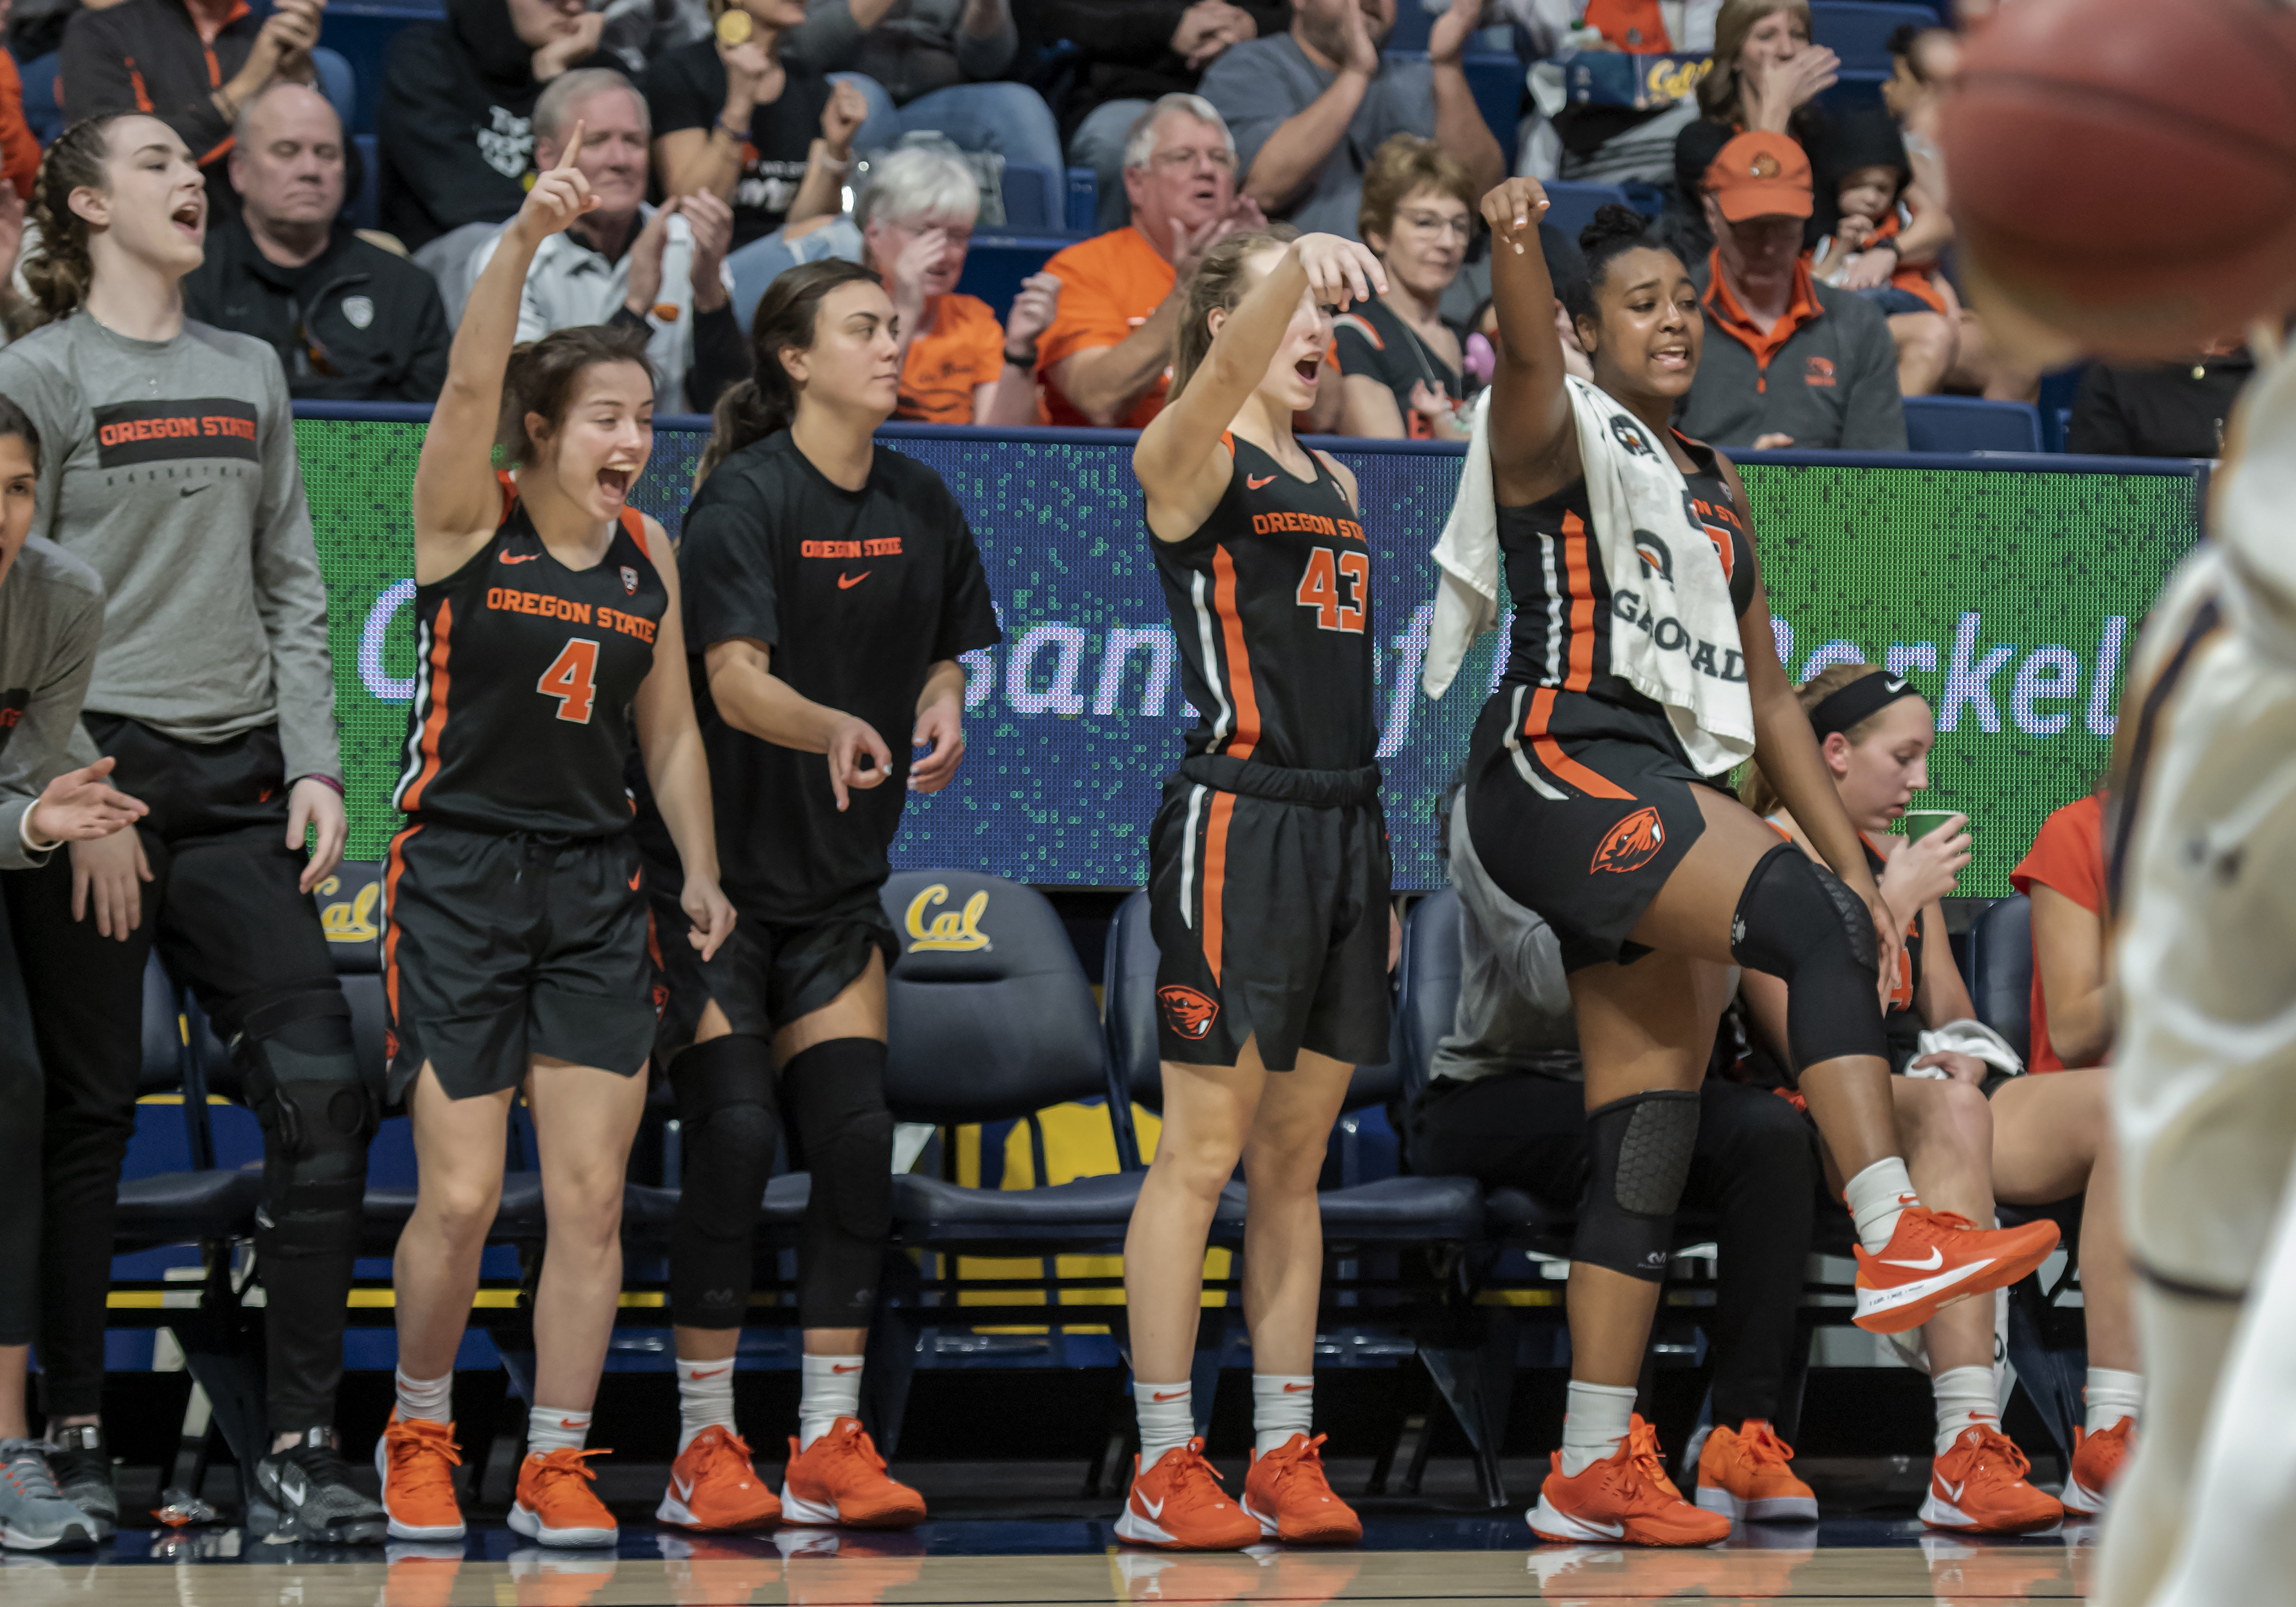 COLLEGE BASKETBALL: FEB 23 Women’s Oregon State at Cal